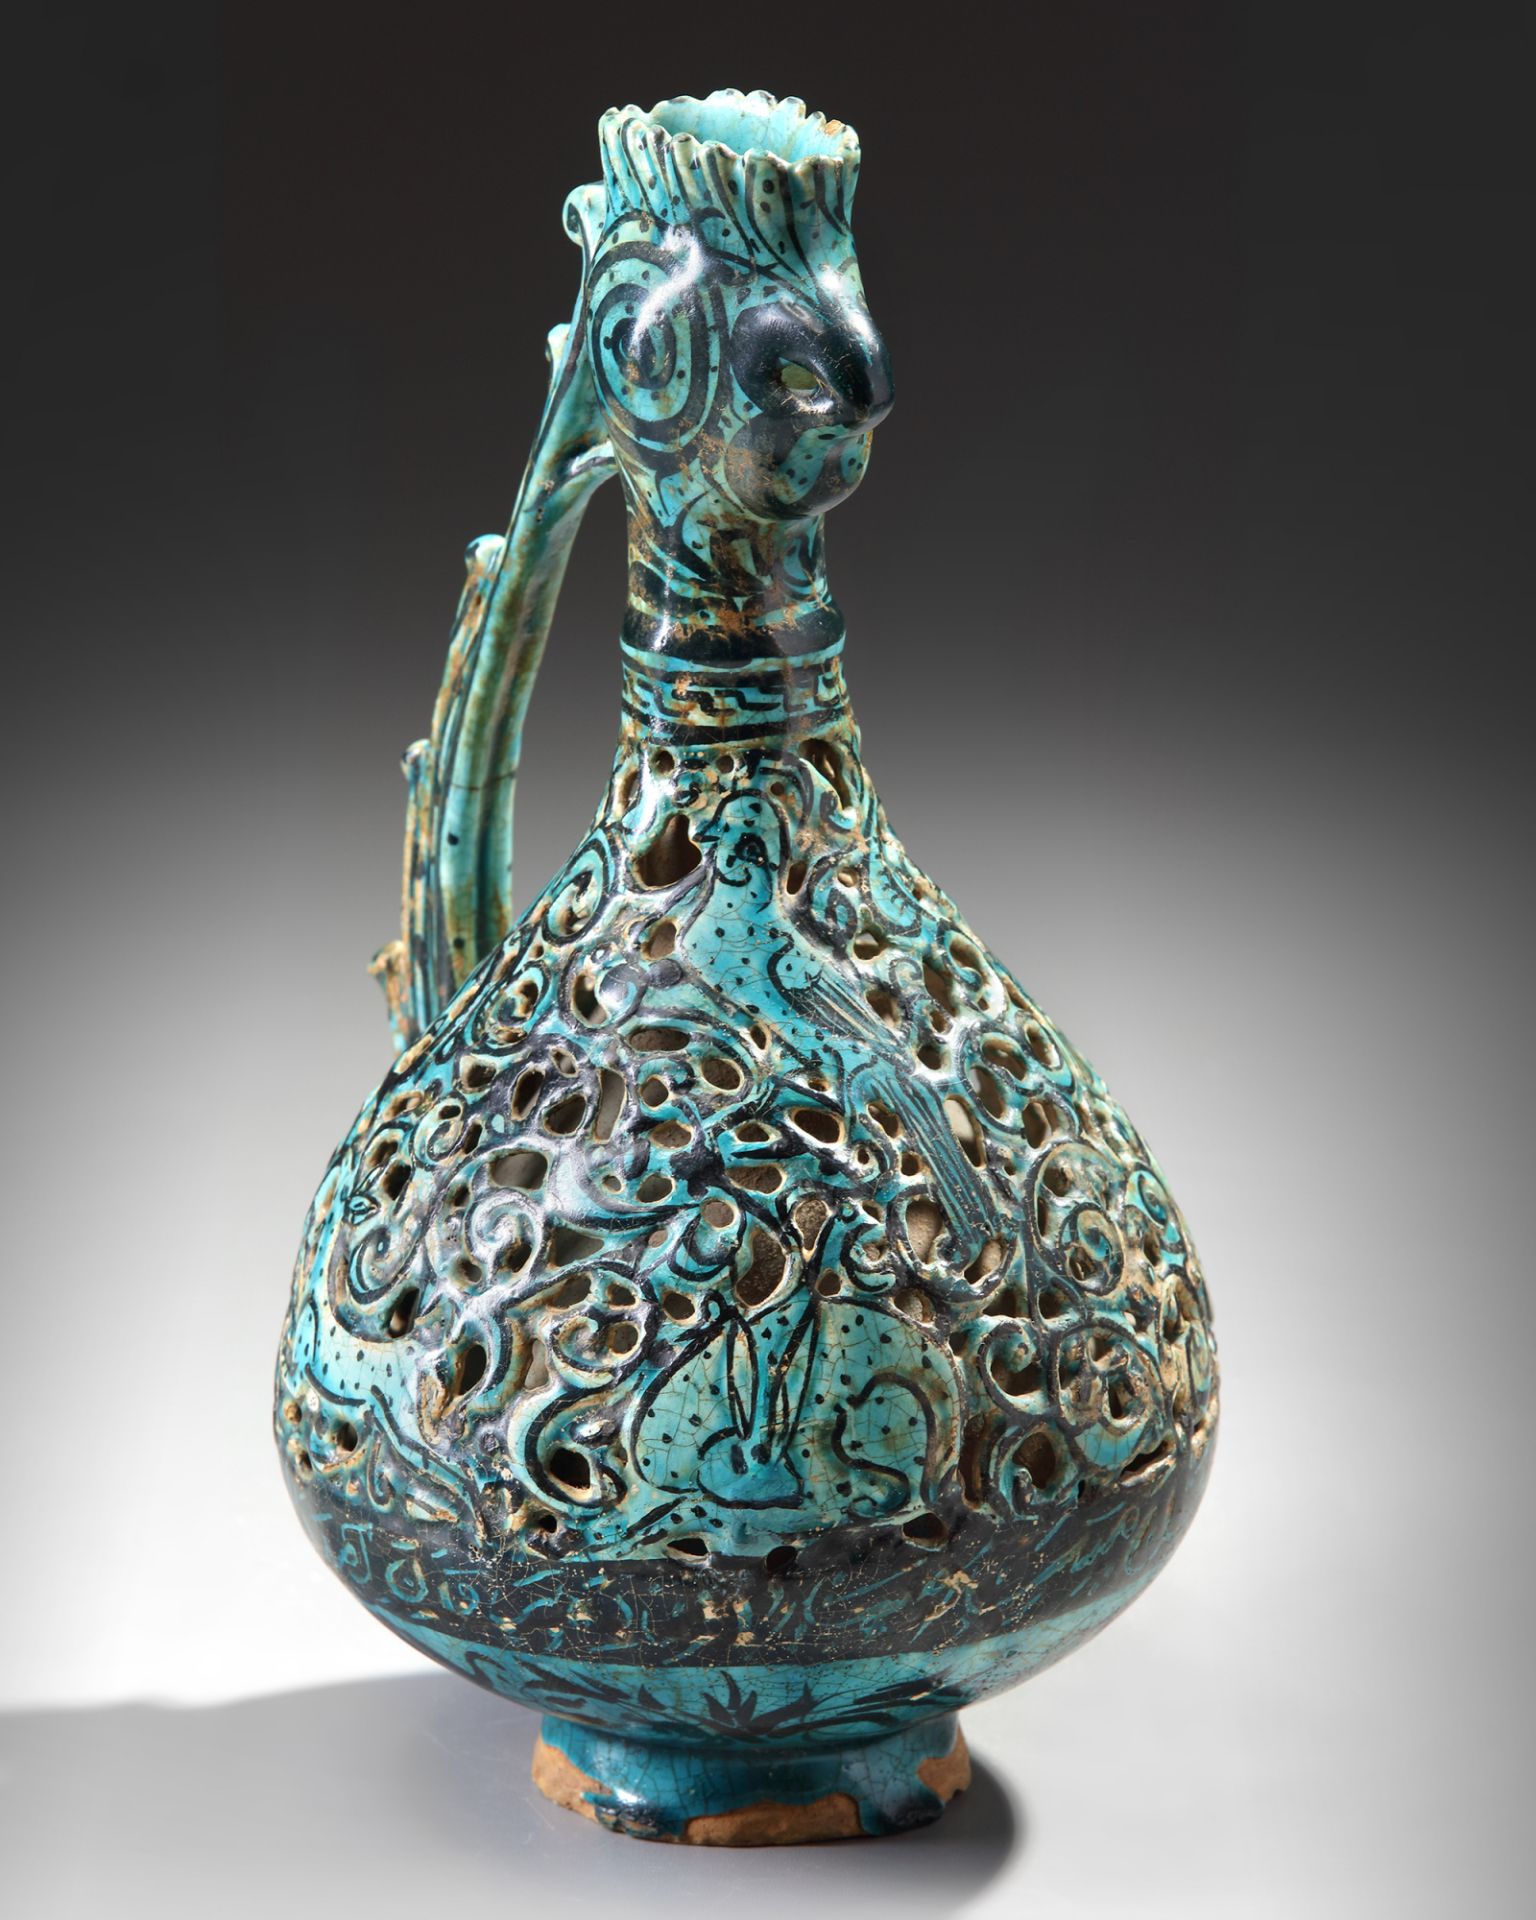 A RARE FRITWARE OPENWORK DECORATED RETICULATED EWER WITH ROOSTER HEAD, PERSIA, 13TH CENTURY - Image 7 of 16